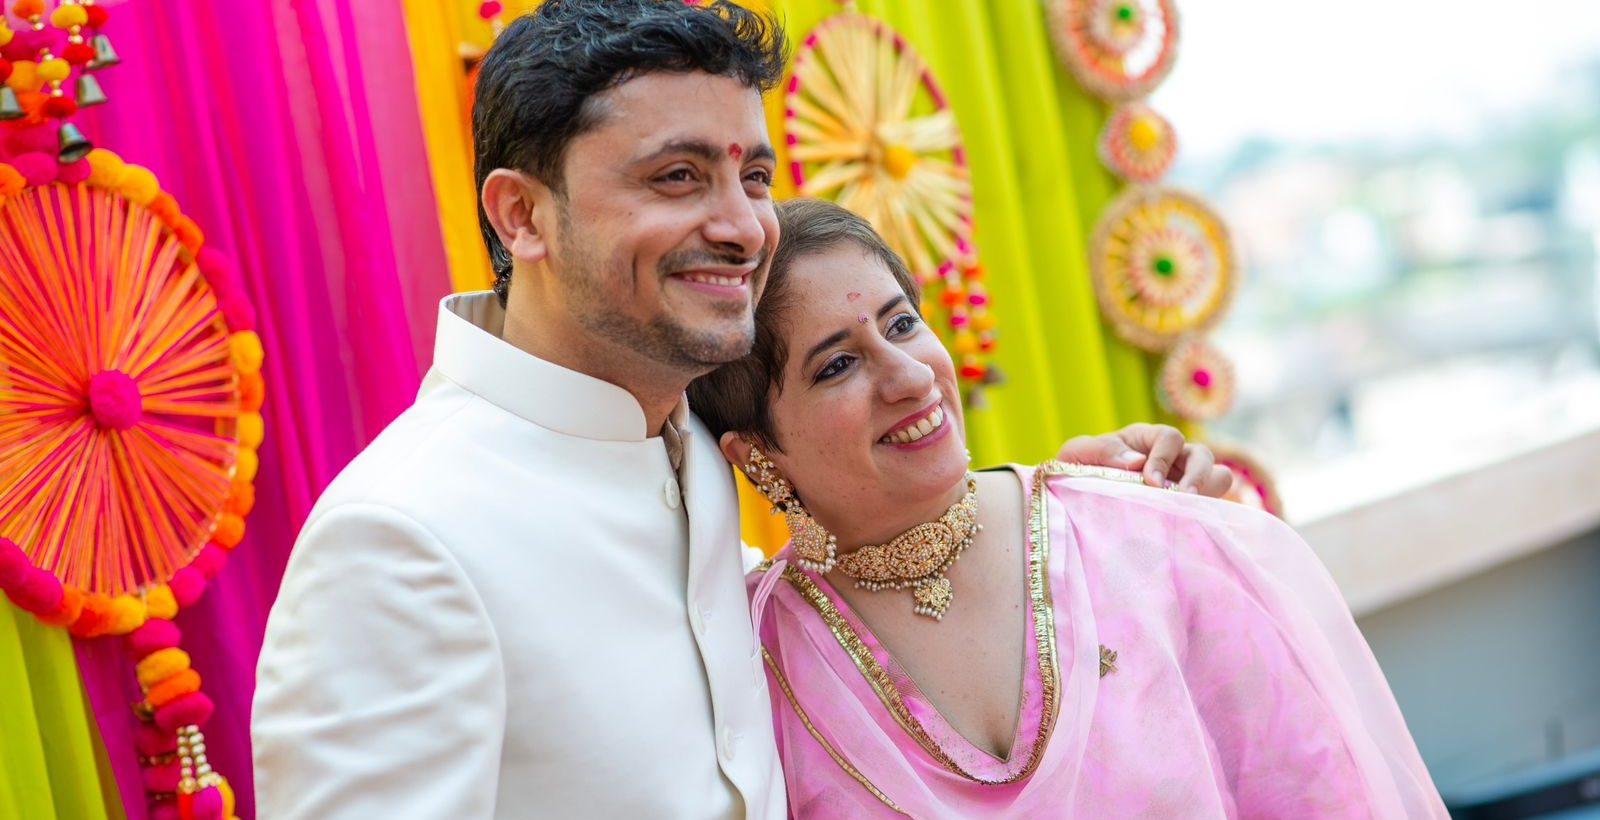 Filmmaker Guneet Monga is getting married in Mumbai, to have extended celebration in Delhi!